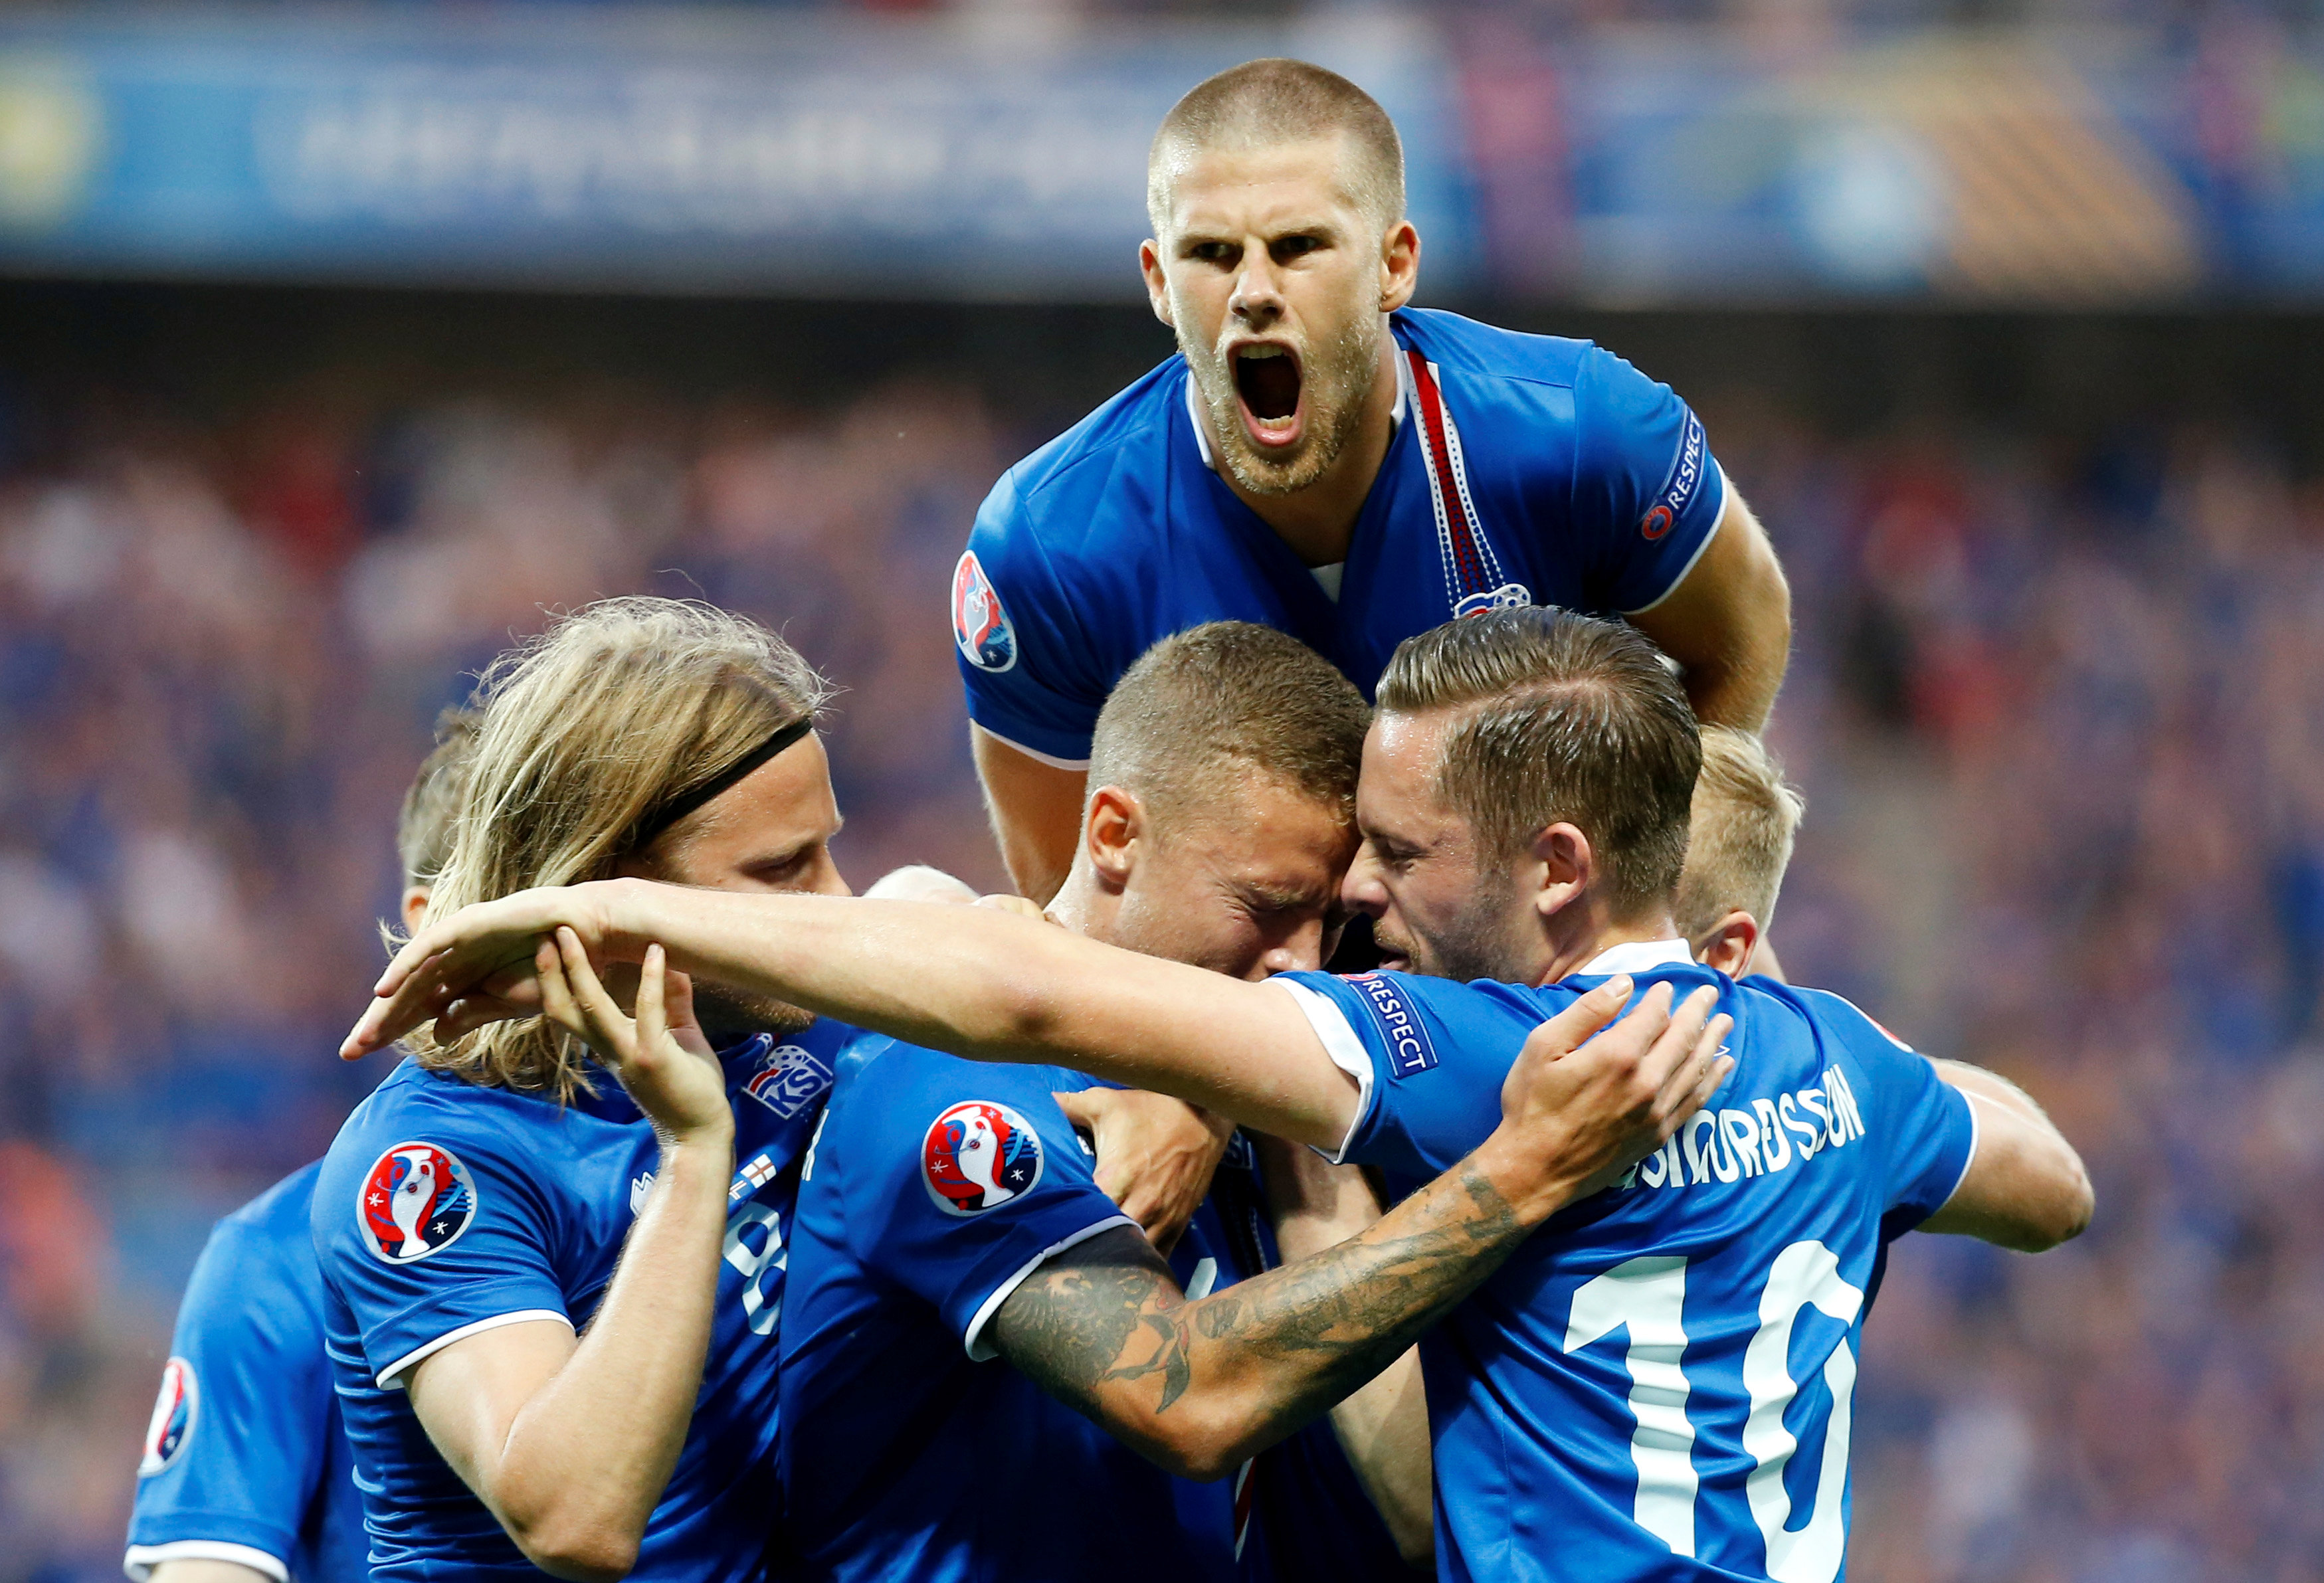 Euro 2016: Iceland Cinderella story a model for others - UEFA